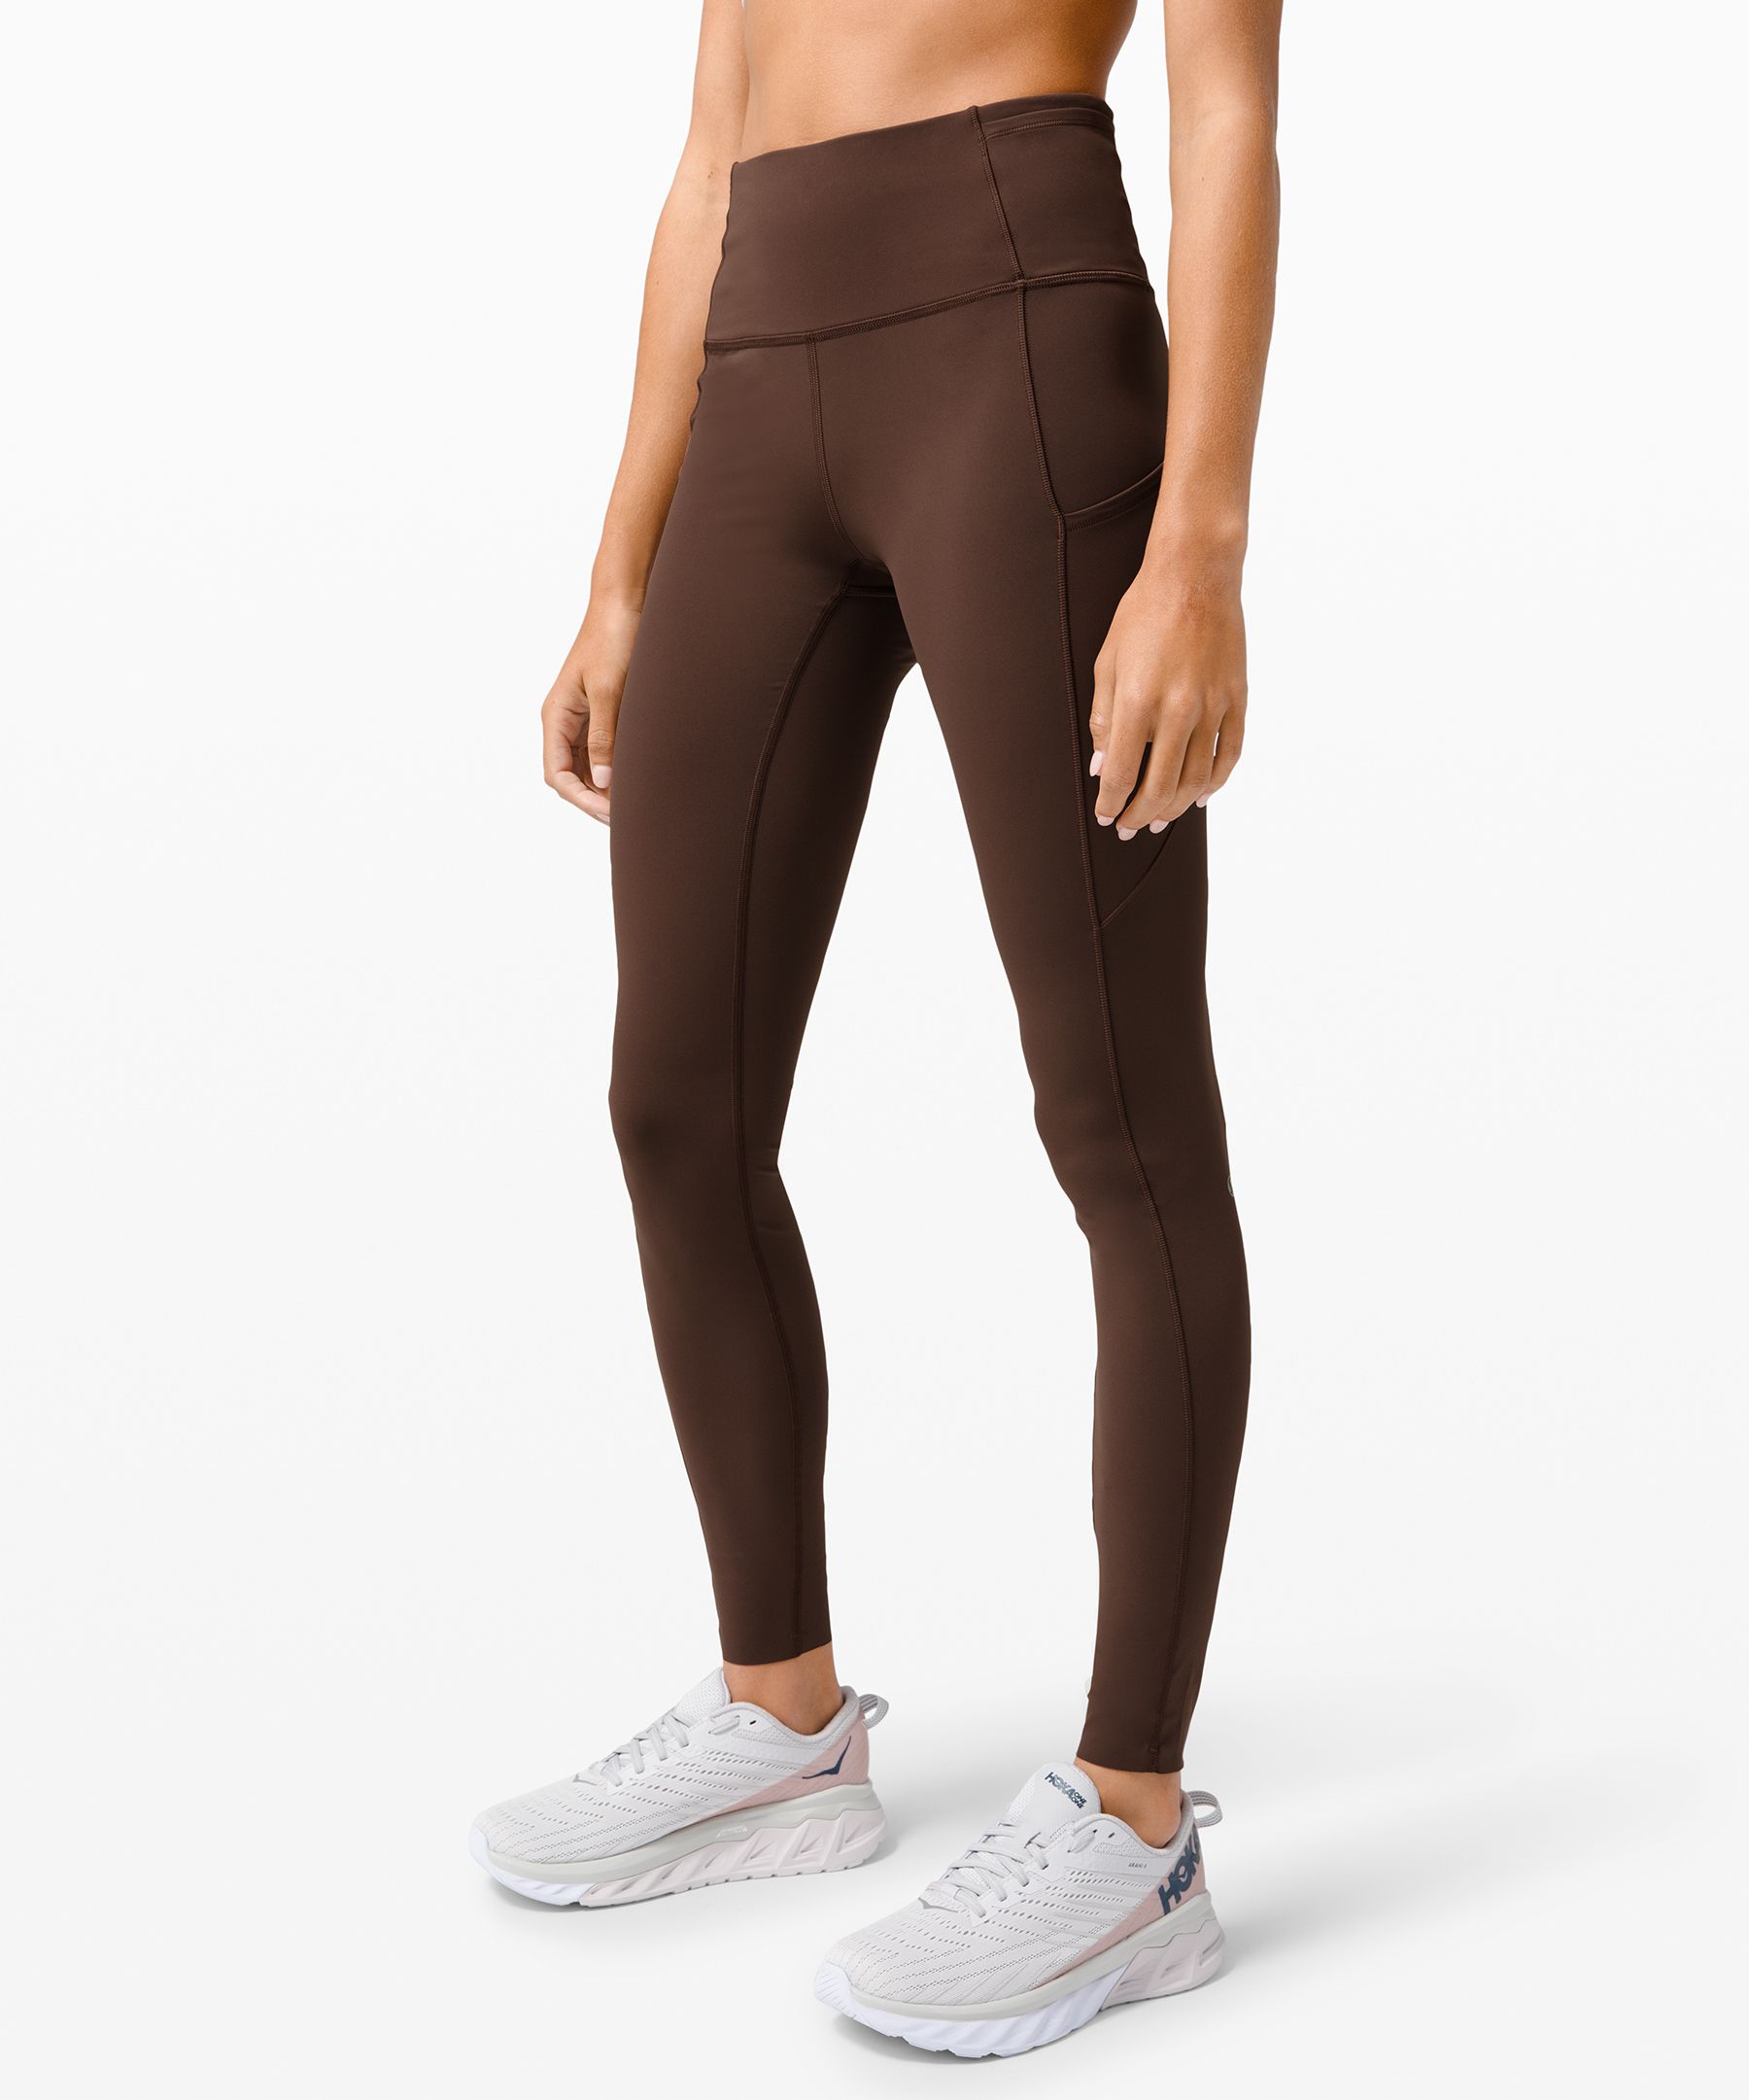 Lululemon fast and free tight 28 non reflective